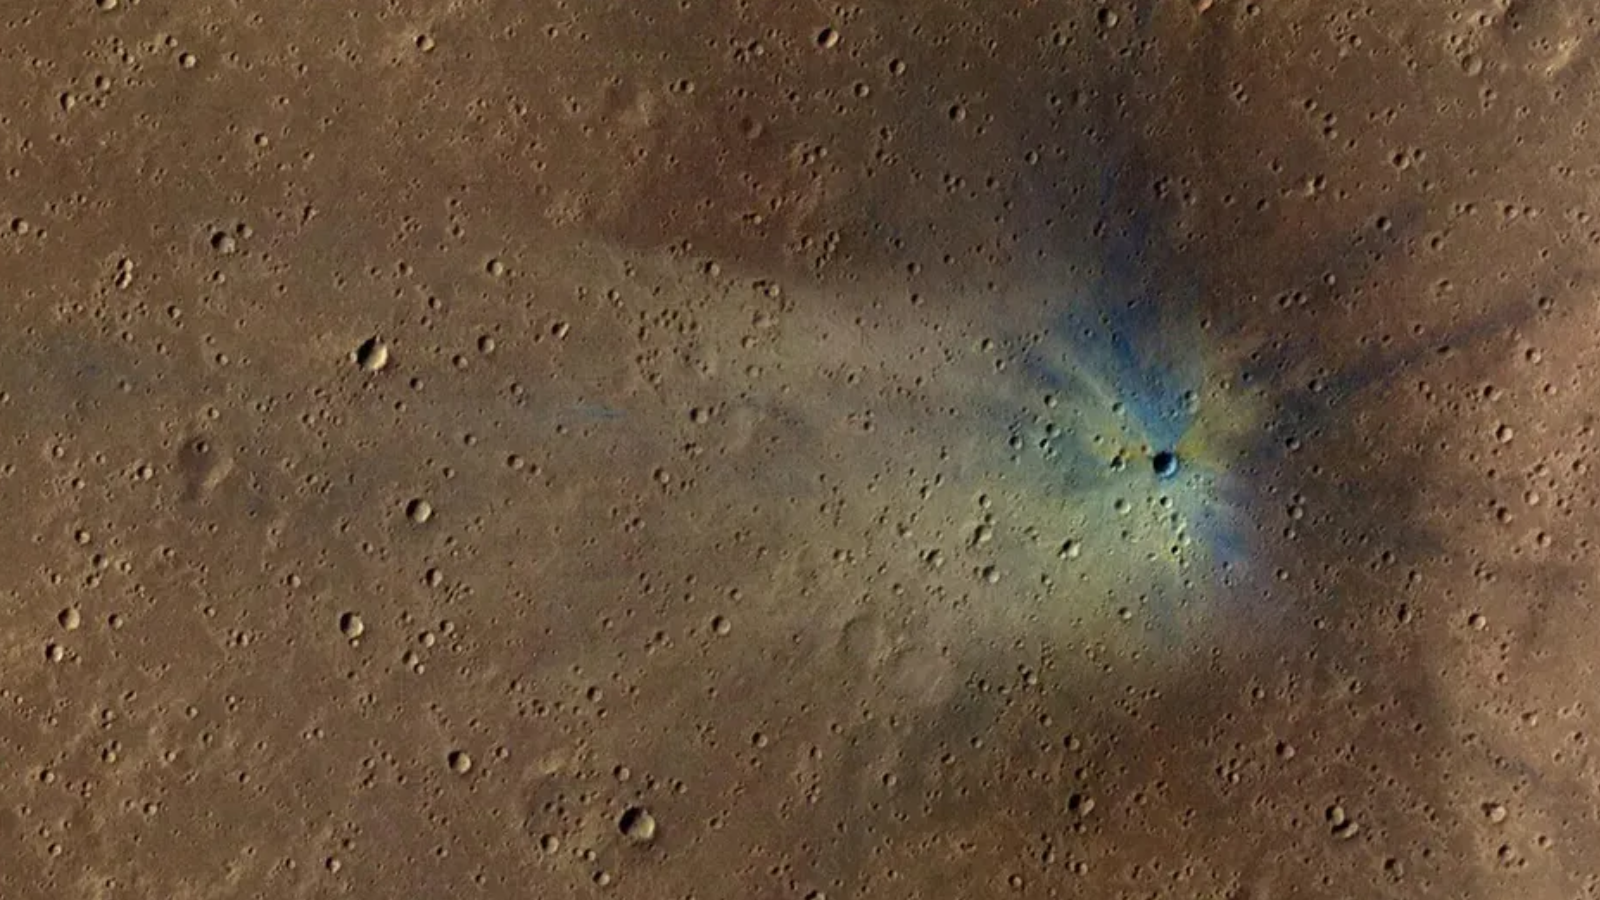 Giant Mars asteroid impact creates vast field of destruction with 2 billion craters Space